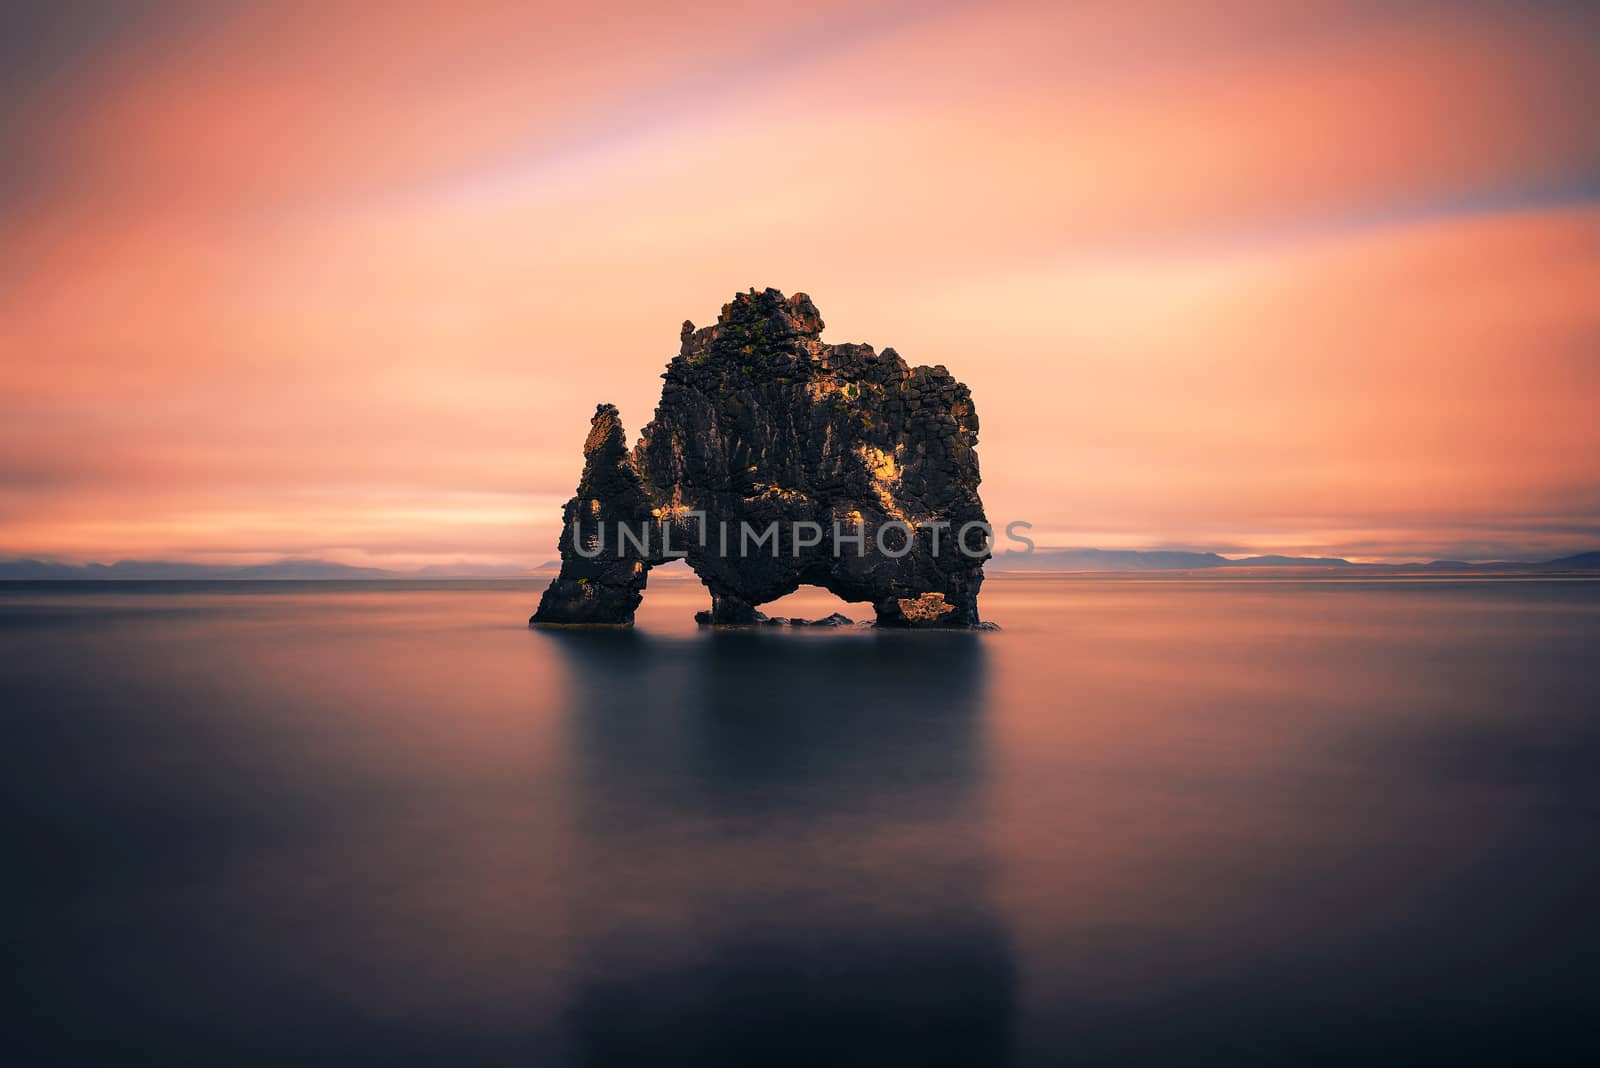 Sunset at the Hvitserkur basalt stack in northern Iceland. Hvitserkur is a spectacular rock in a shape of a dragon or dinosaur drinking water from the ocean. Long exposure.